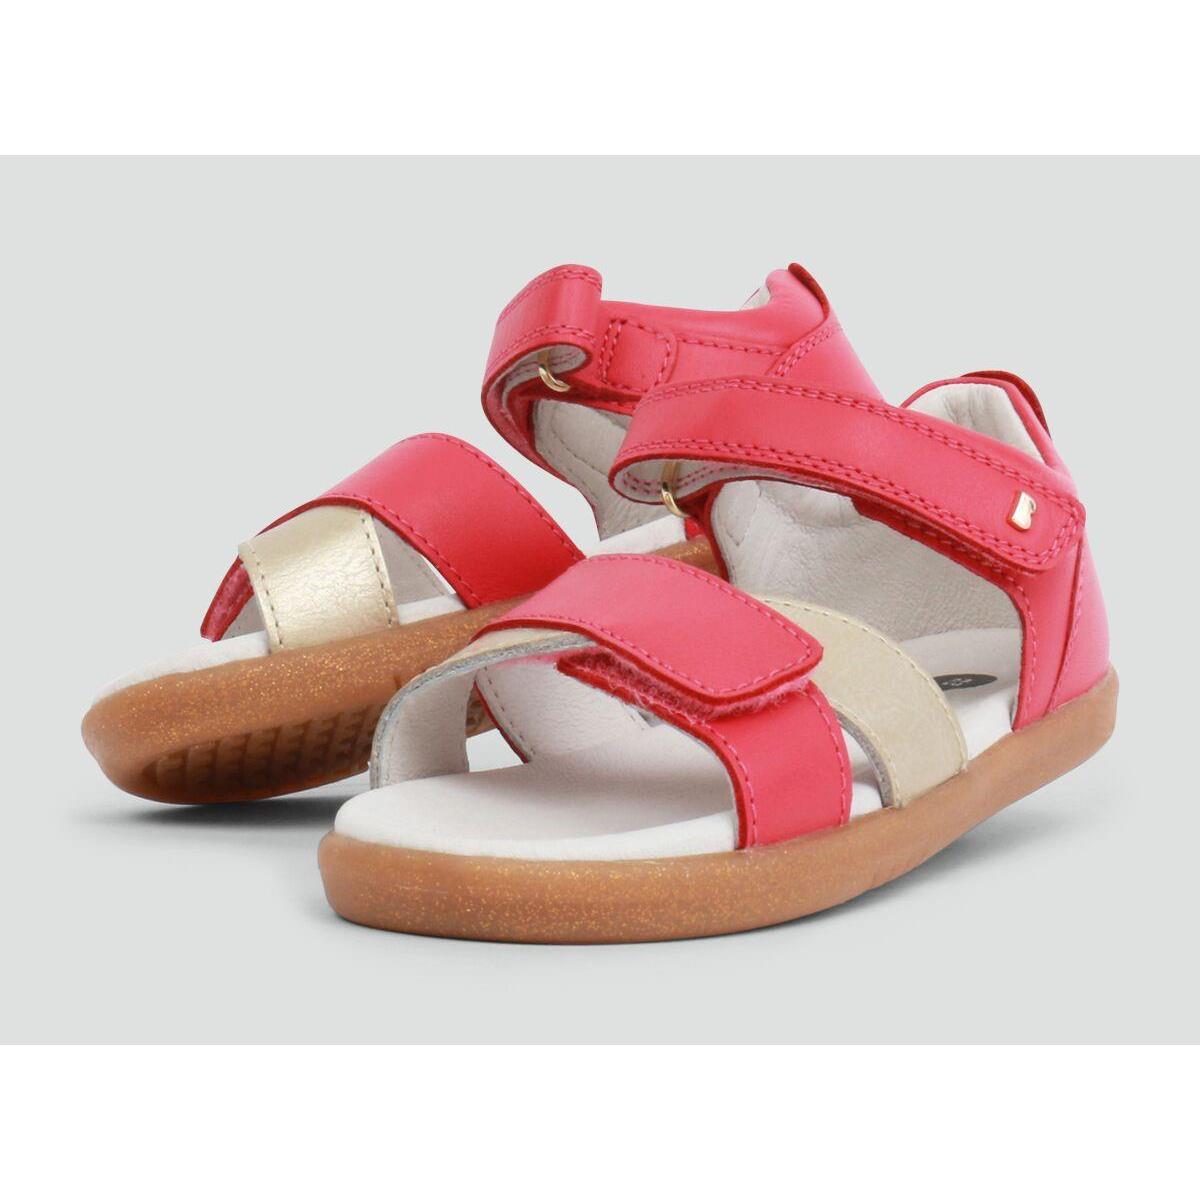 Bobux IW Sail Watermelon With Misty Gold Open Toe sandal